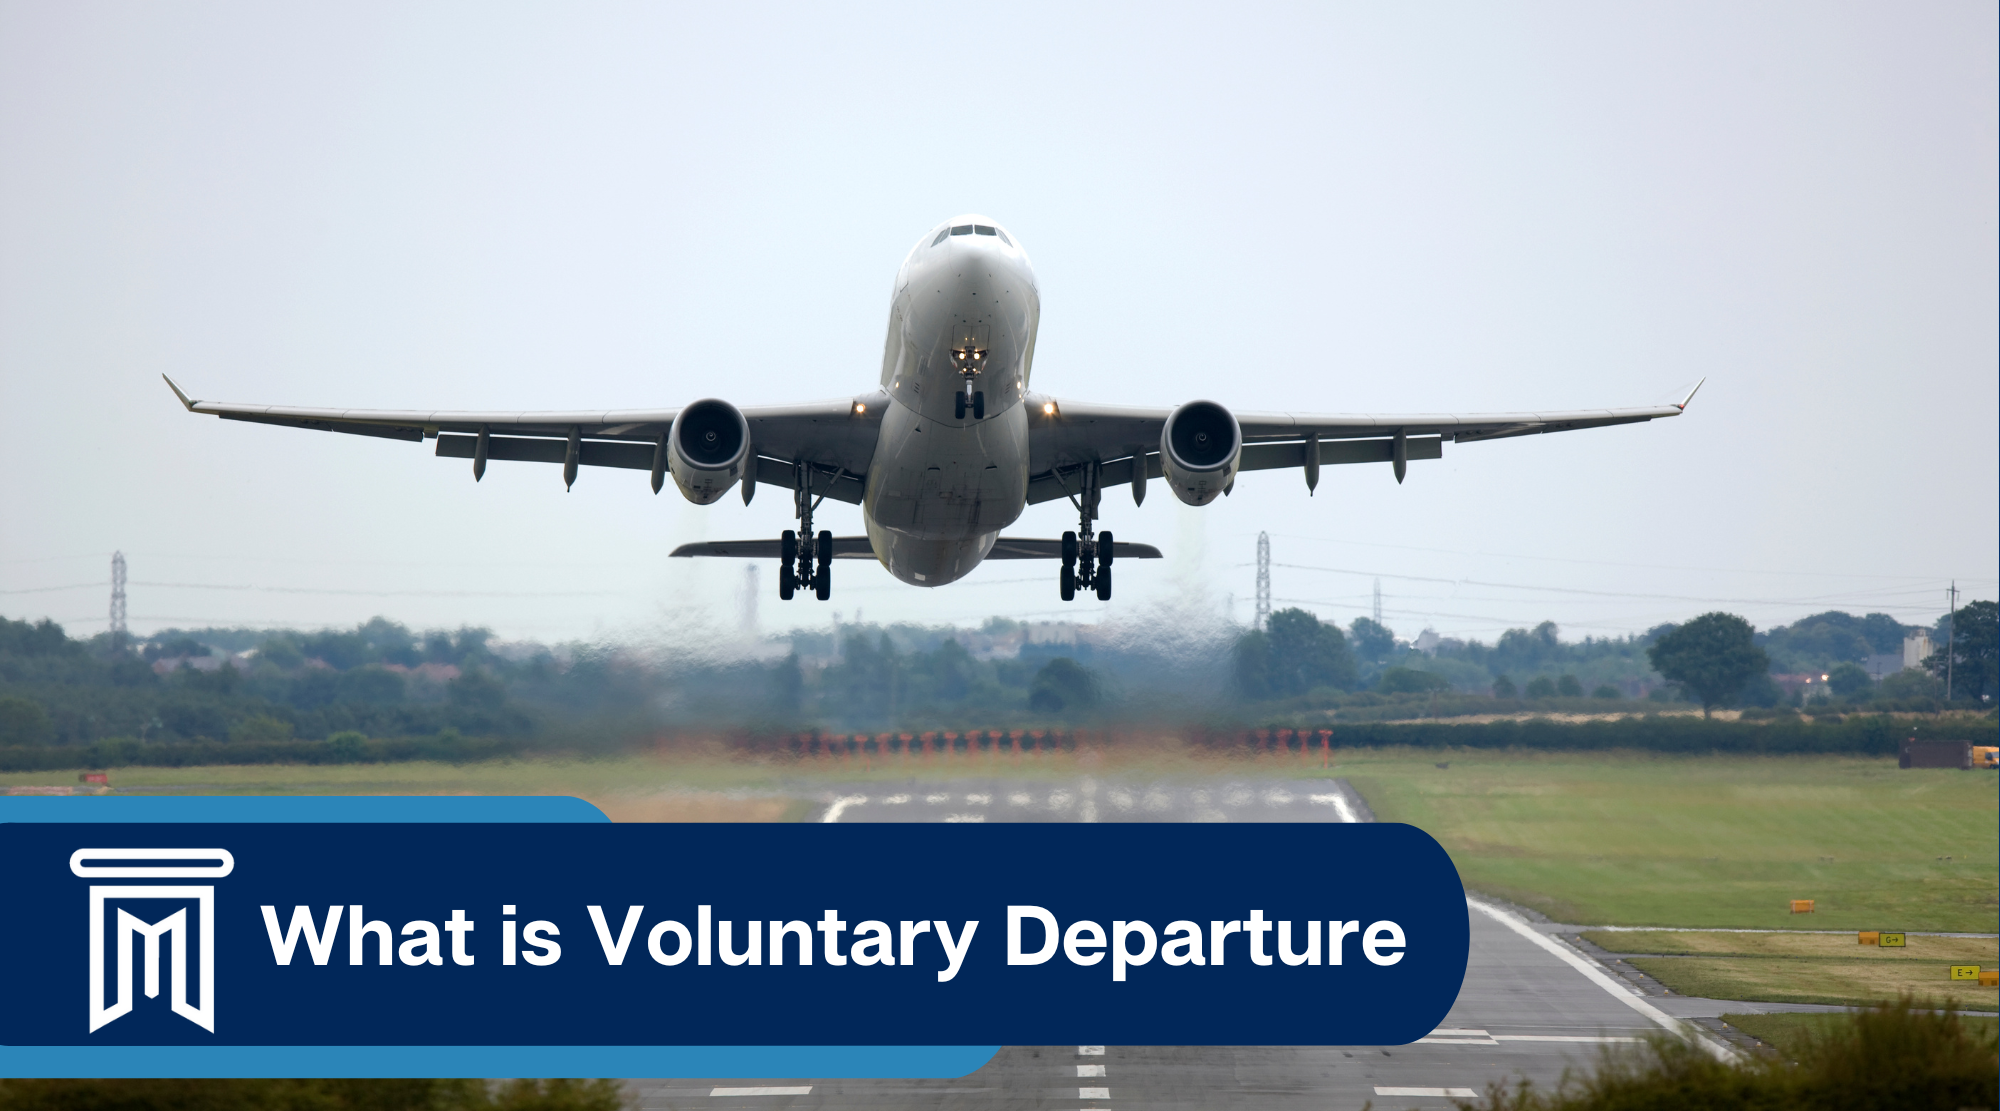 What is Voluntary Departure